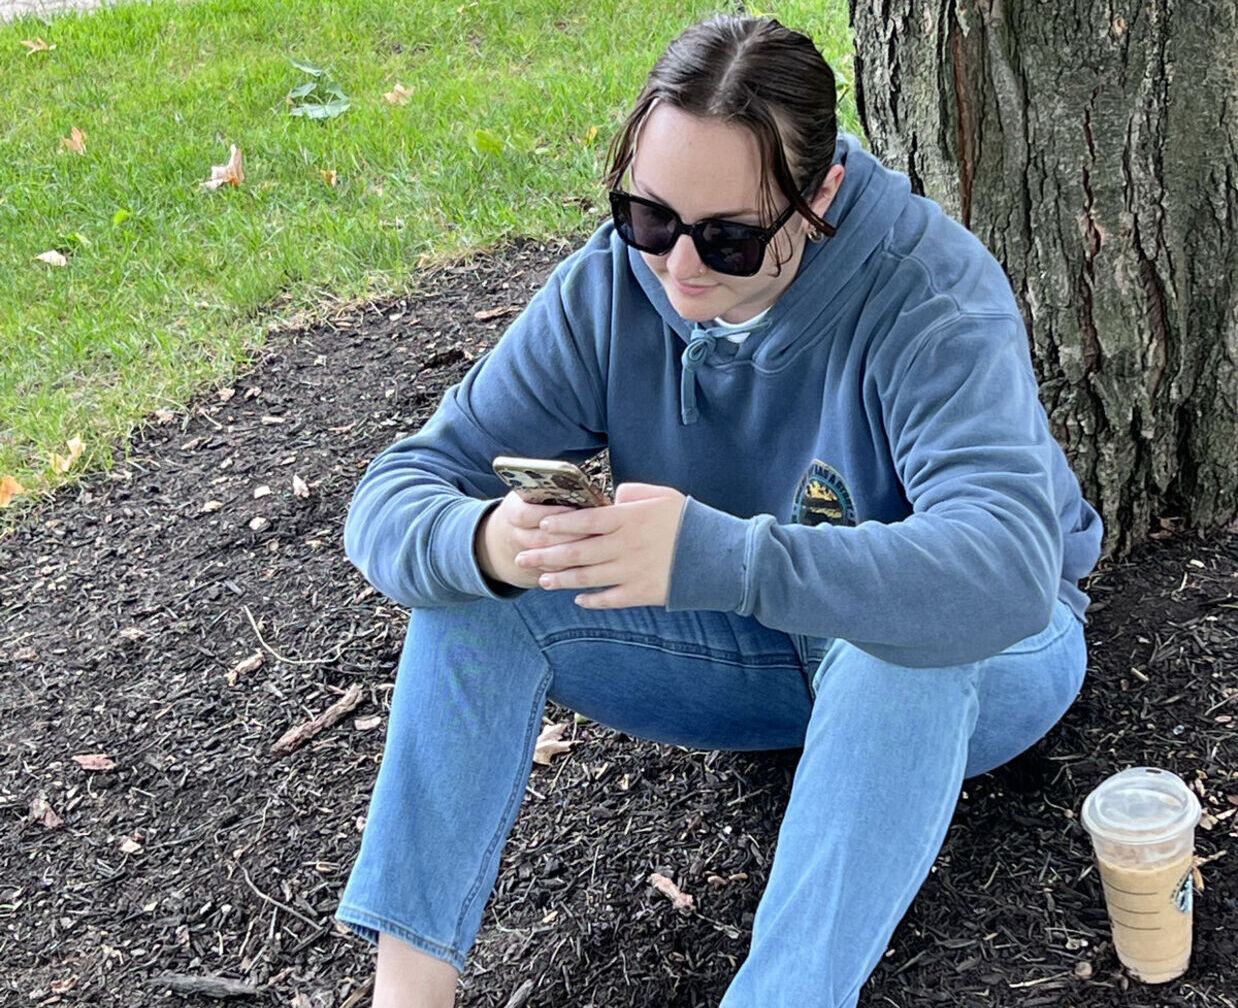 A student checks her phone while sitting under a tree on campus